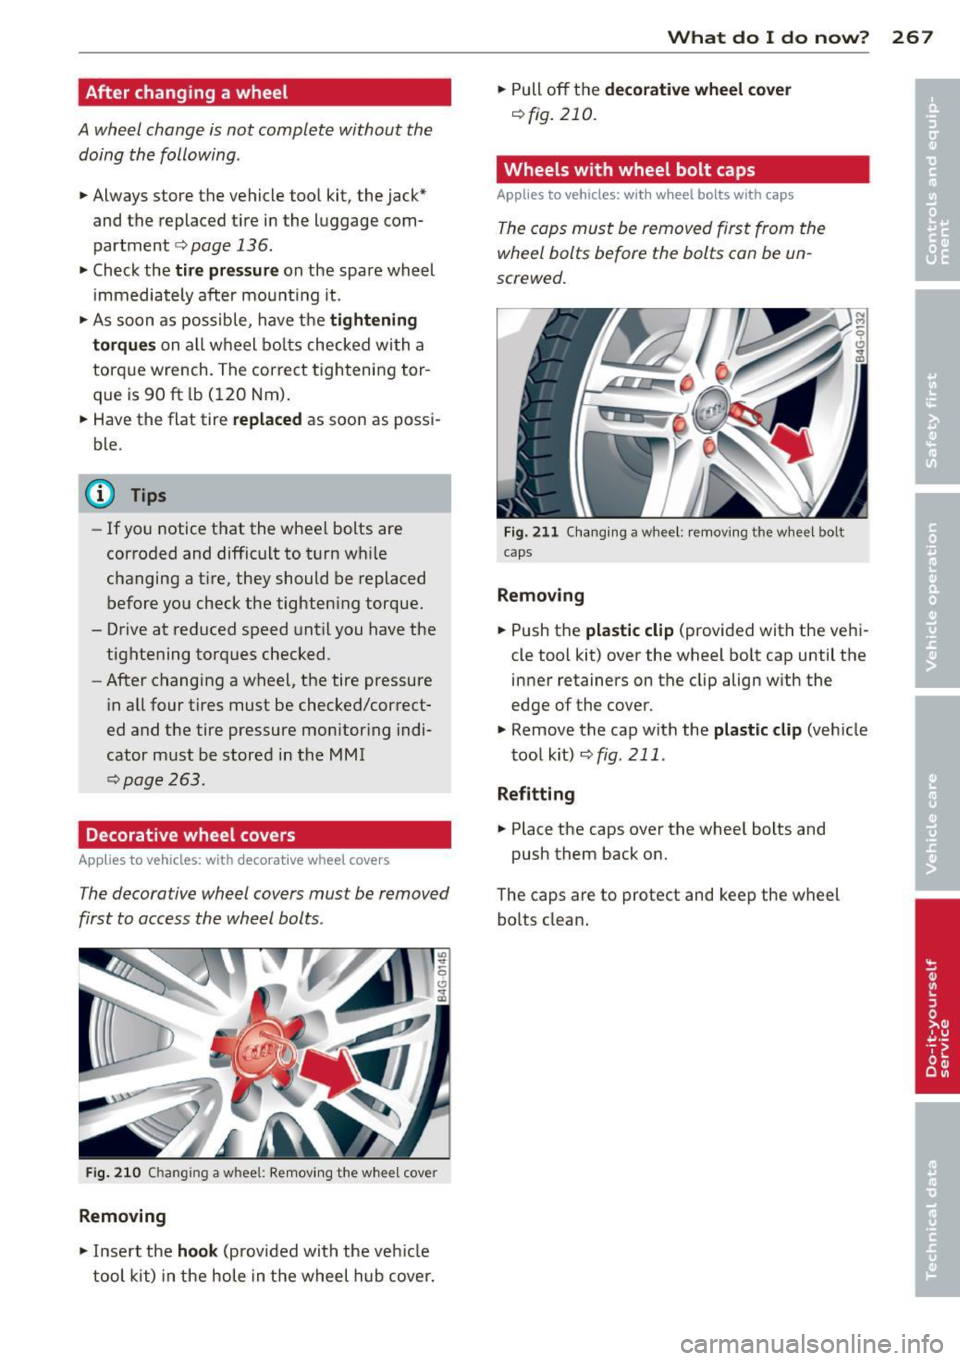 AUDI S7 2014  Owners Manual After  changing  a wheel 
A wheel  change  is not  complete  without  the doing  the  following . 
• Always store  the  vehicle  tool  kit,  the  jack* 
and  the  replaced  tire  in the  luggage  co